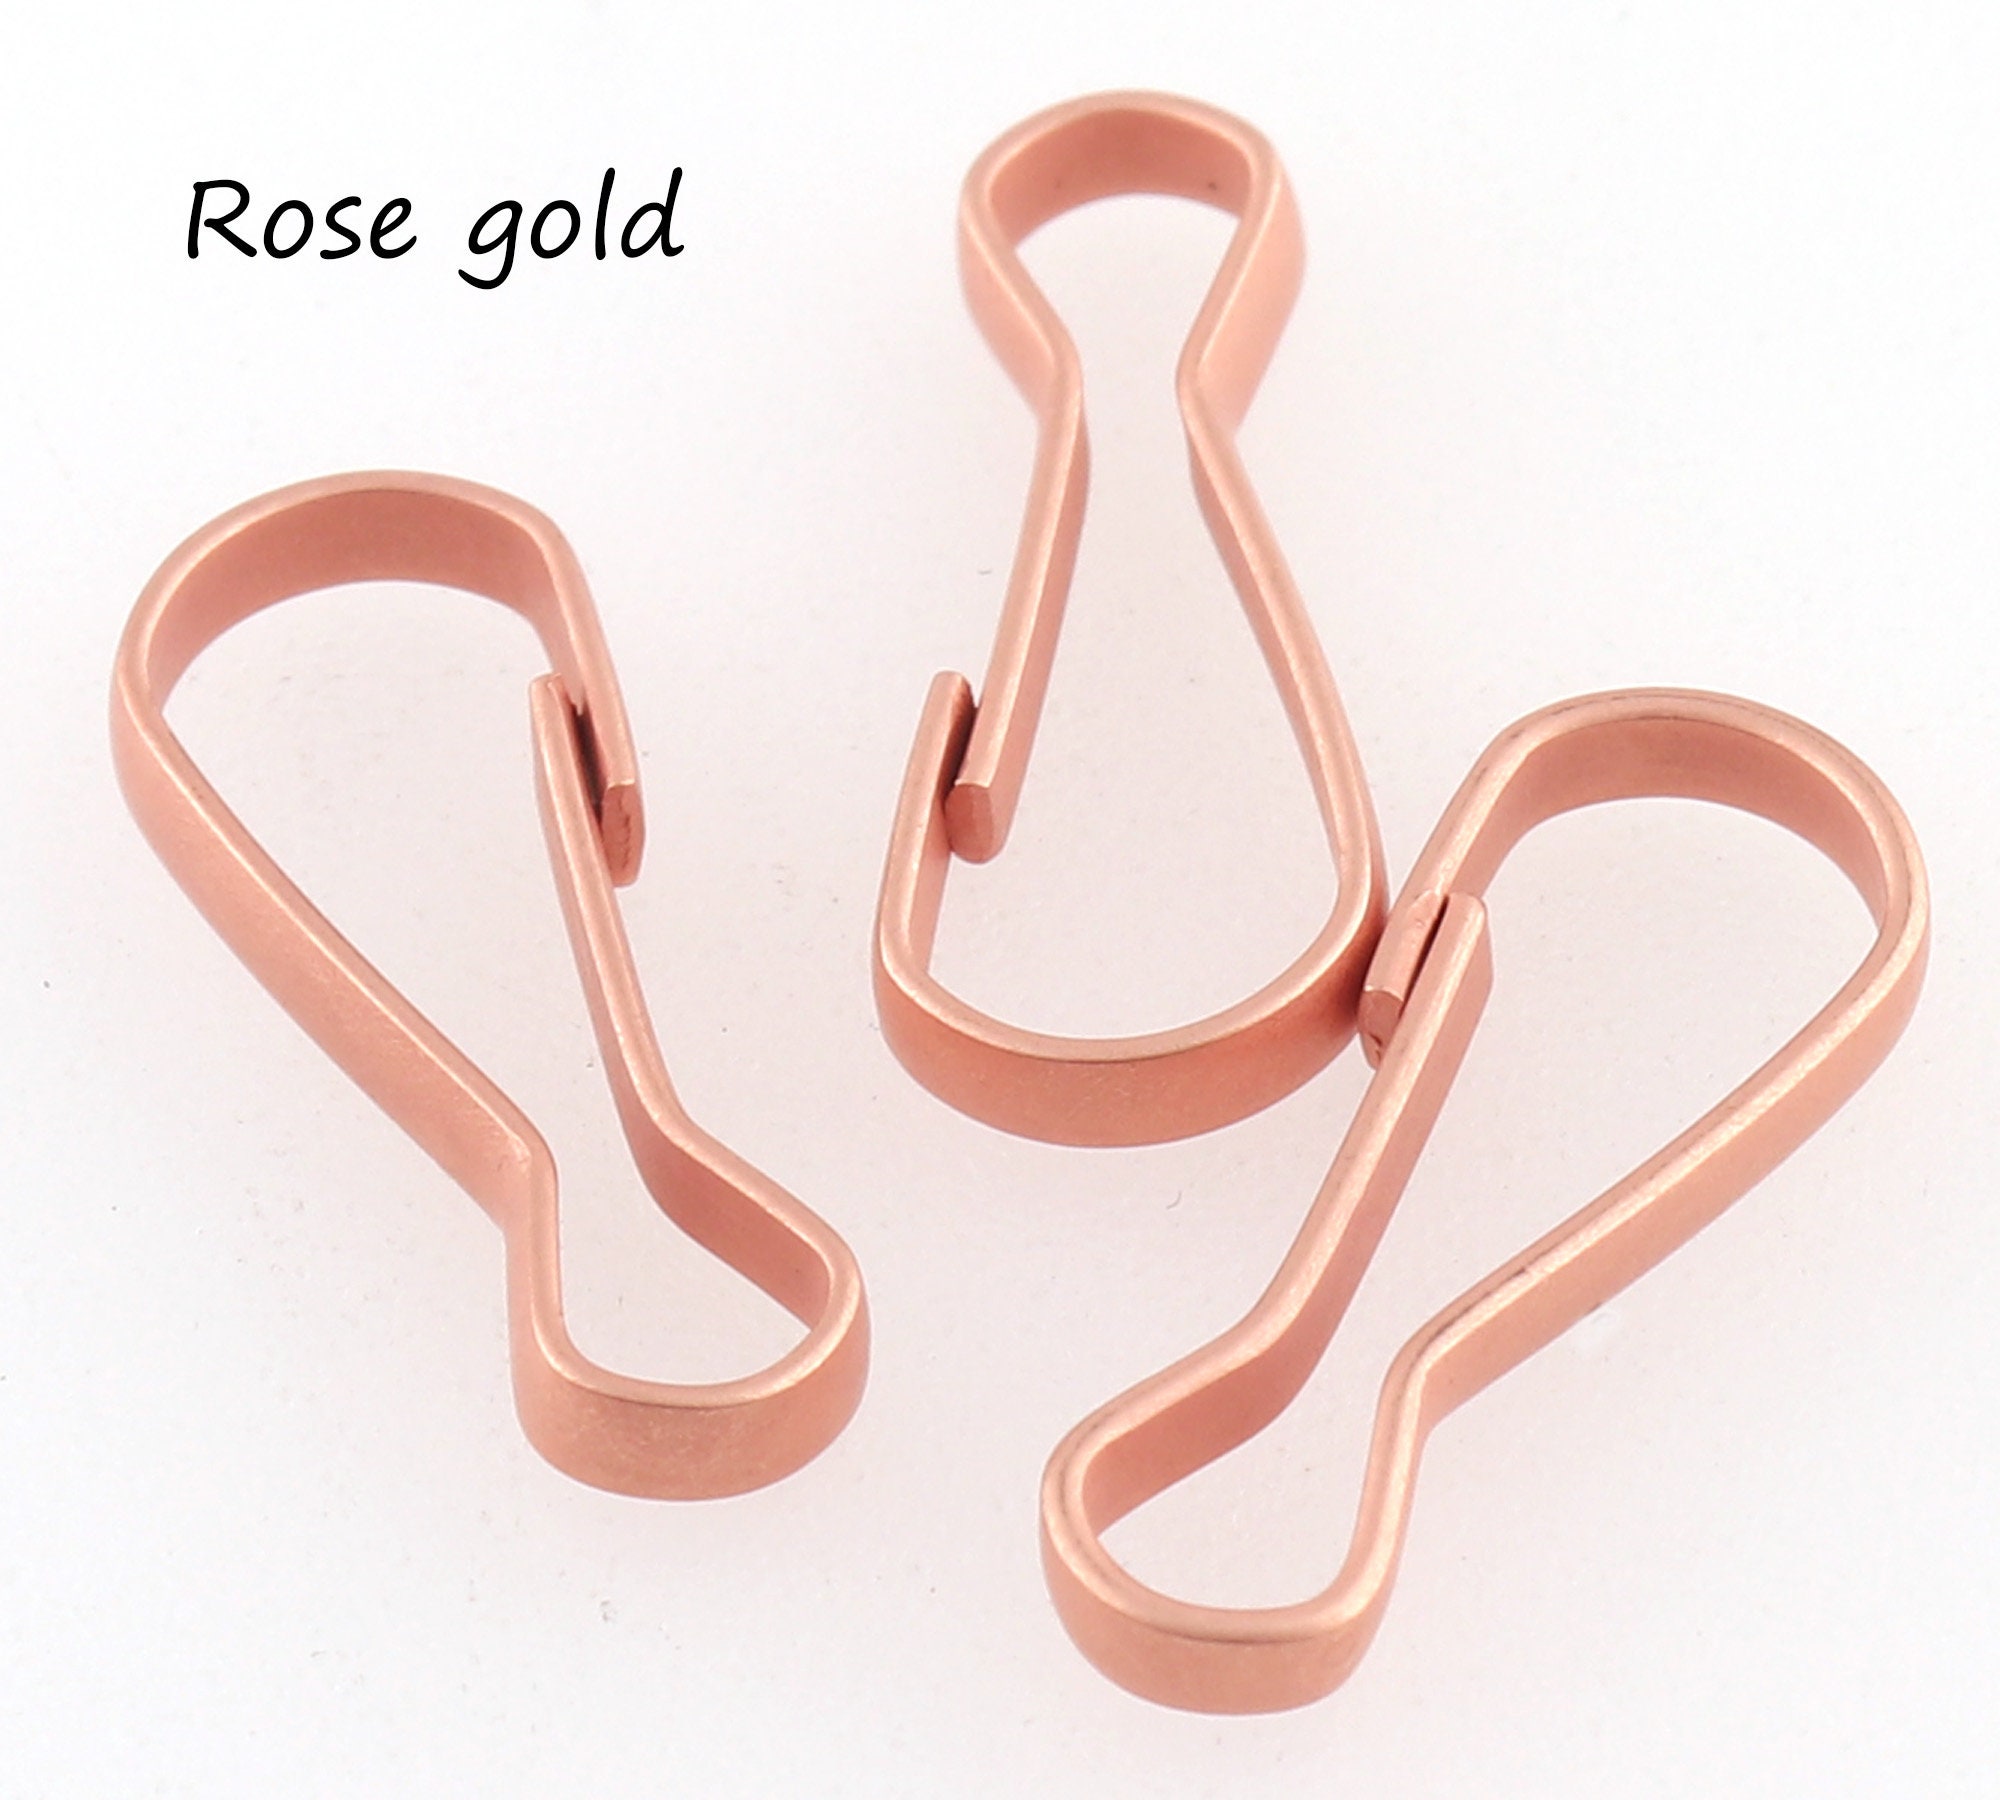 Lanyard Hooks,metal Lanyard Clips,accessory Clip,silver/gold/rose Gold DIY  Craft Supply,jewelry Supplies,bulk Craft for ID Card/keychain 